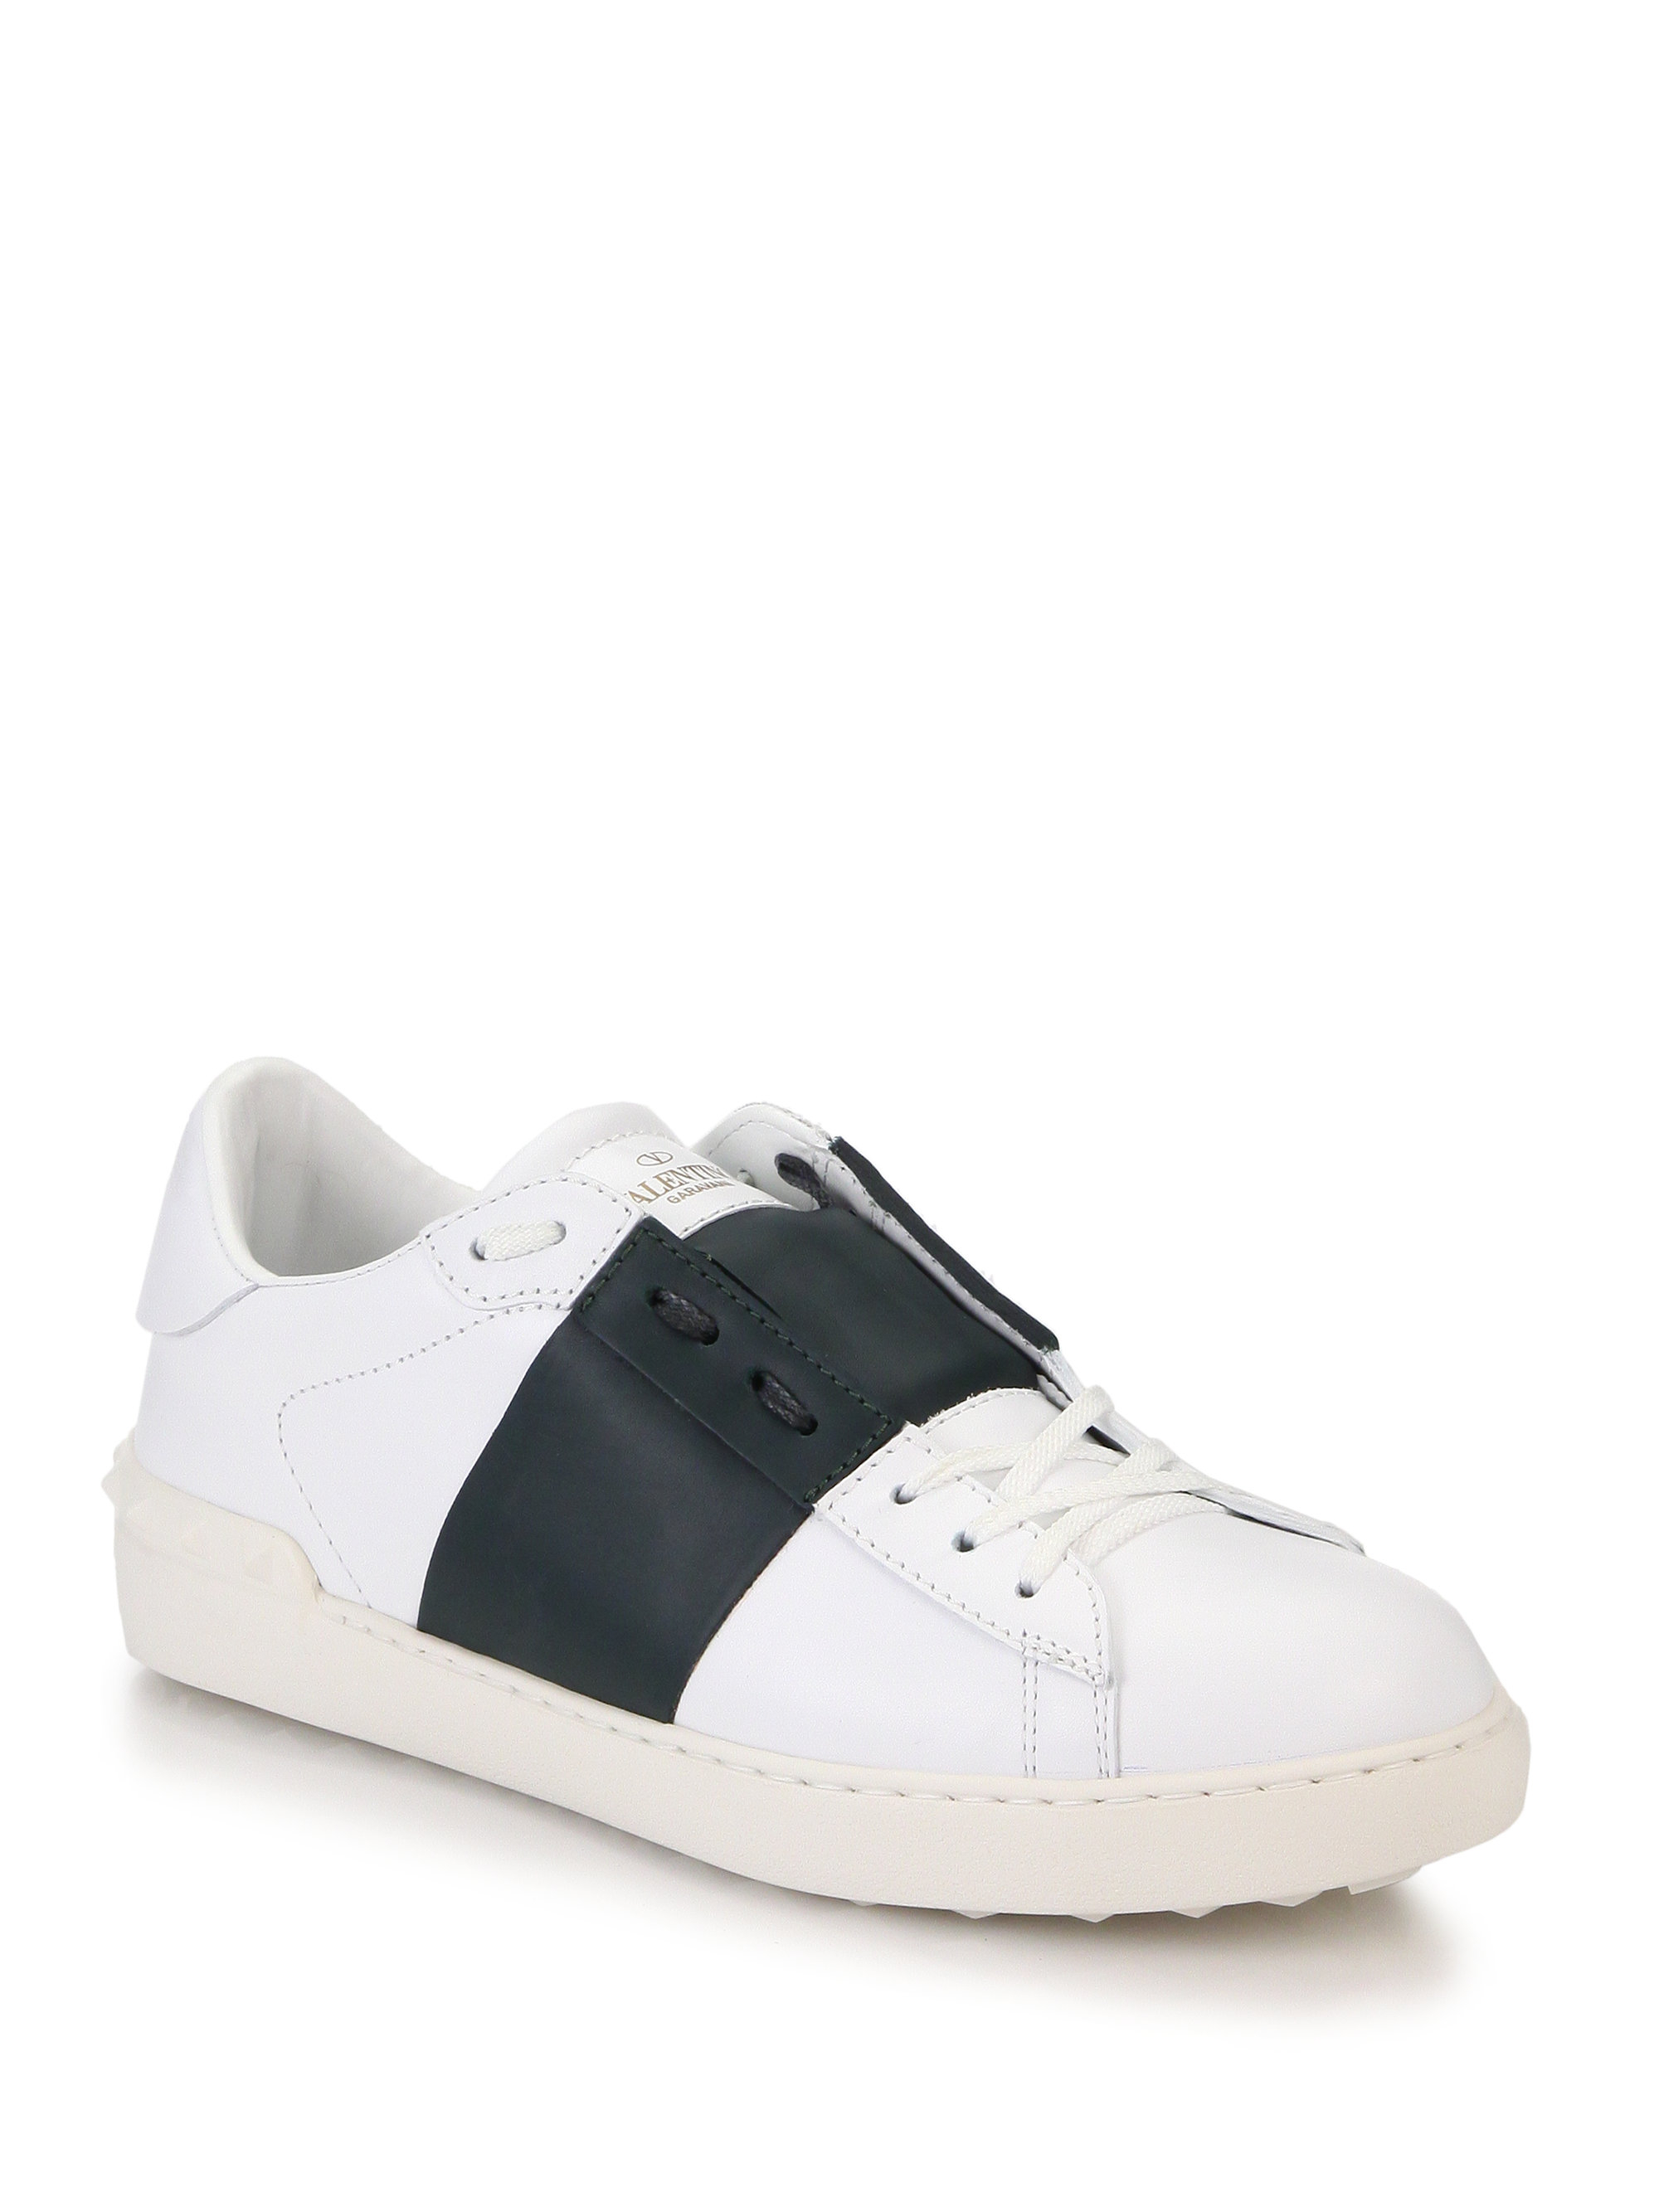 Lyst - Valentino Striped Leather Sneakers in White